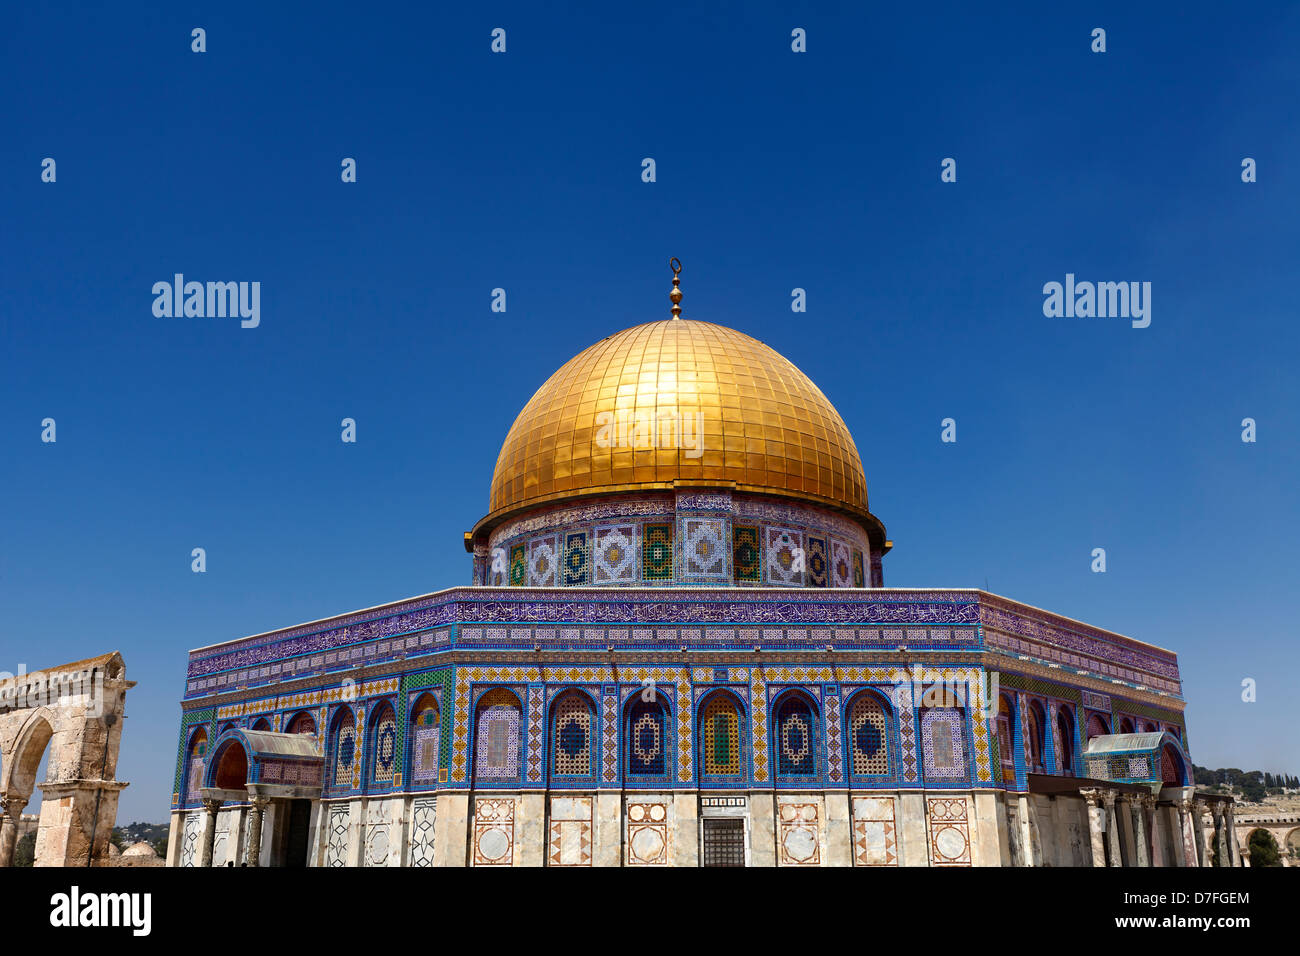 One of the holiest places to the Islam, the Dome Of The Rock in the old city of Jerusalem. Stock Photo